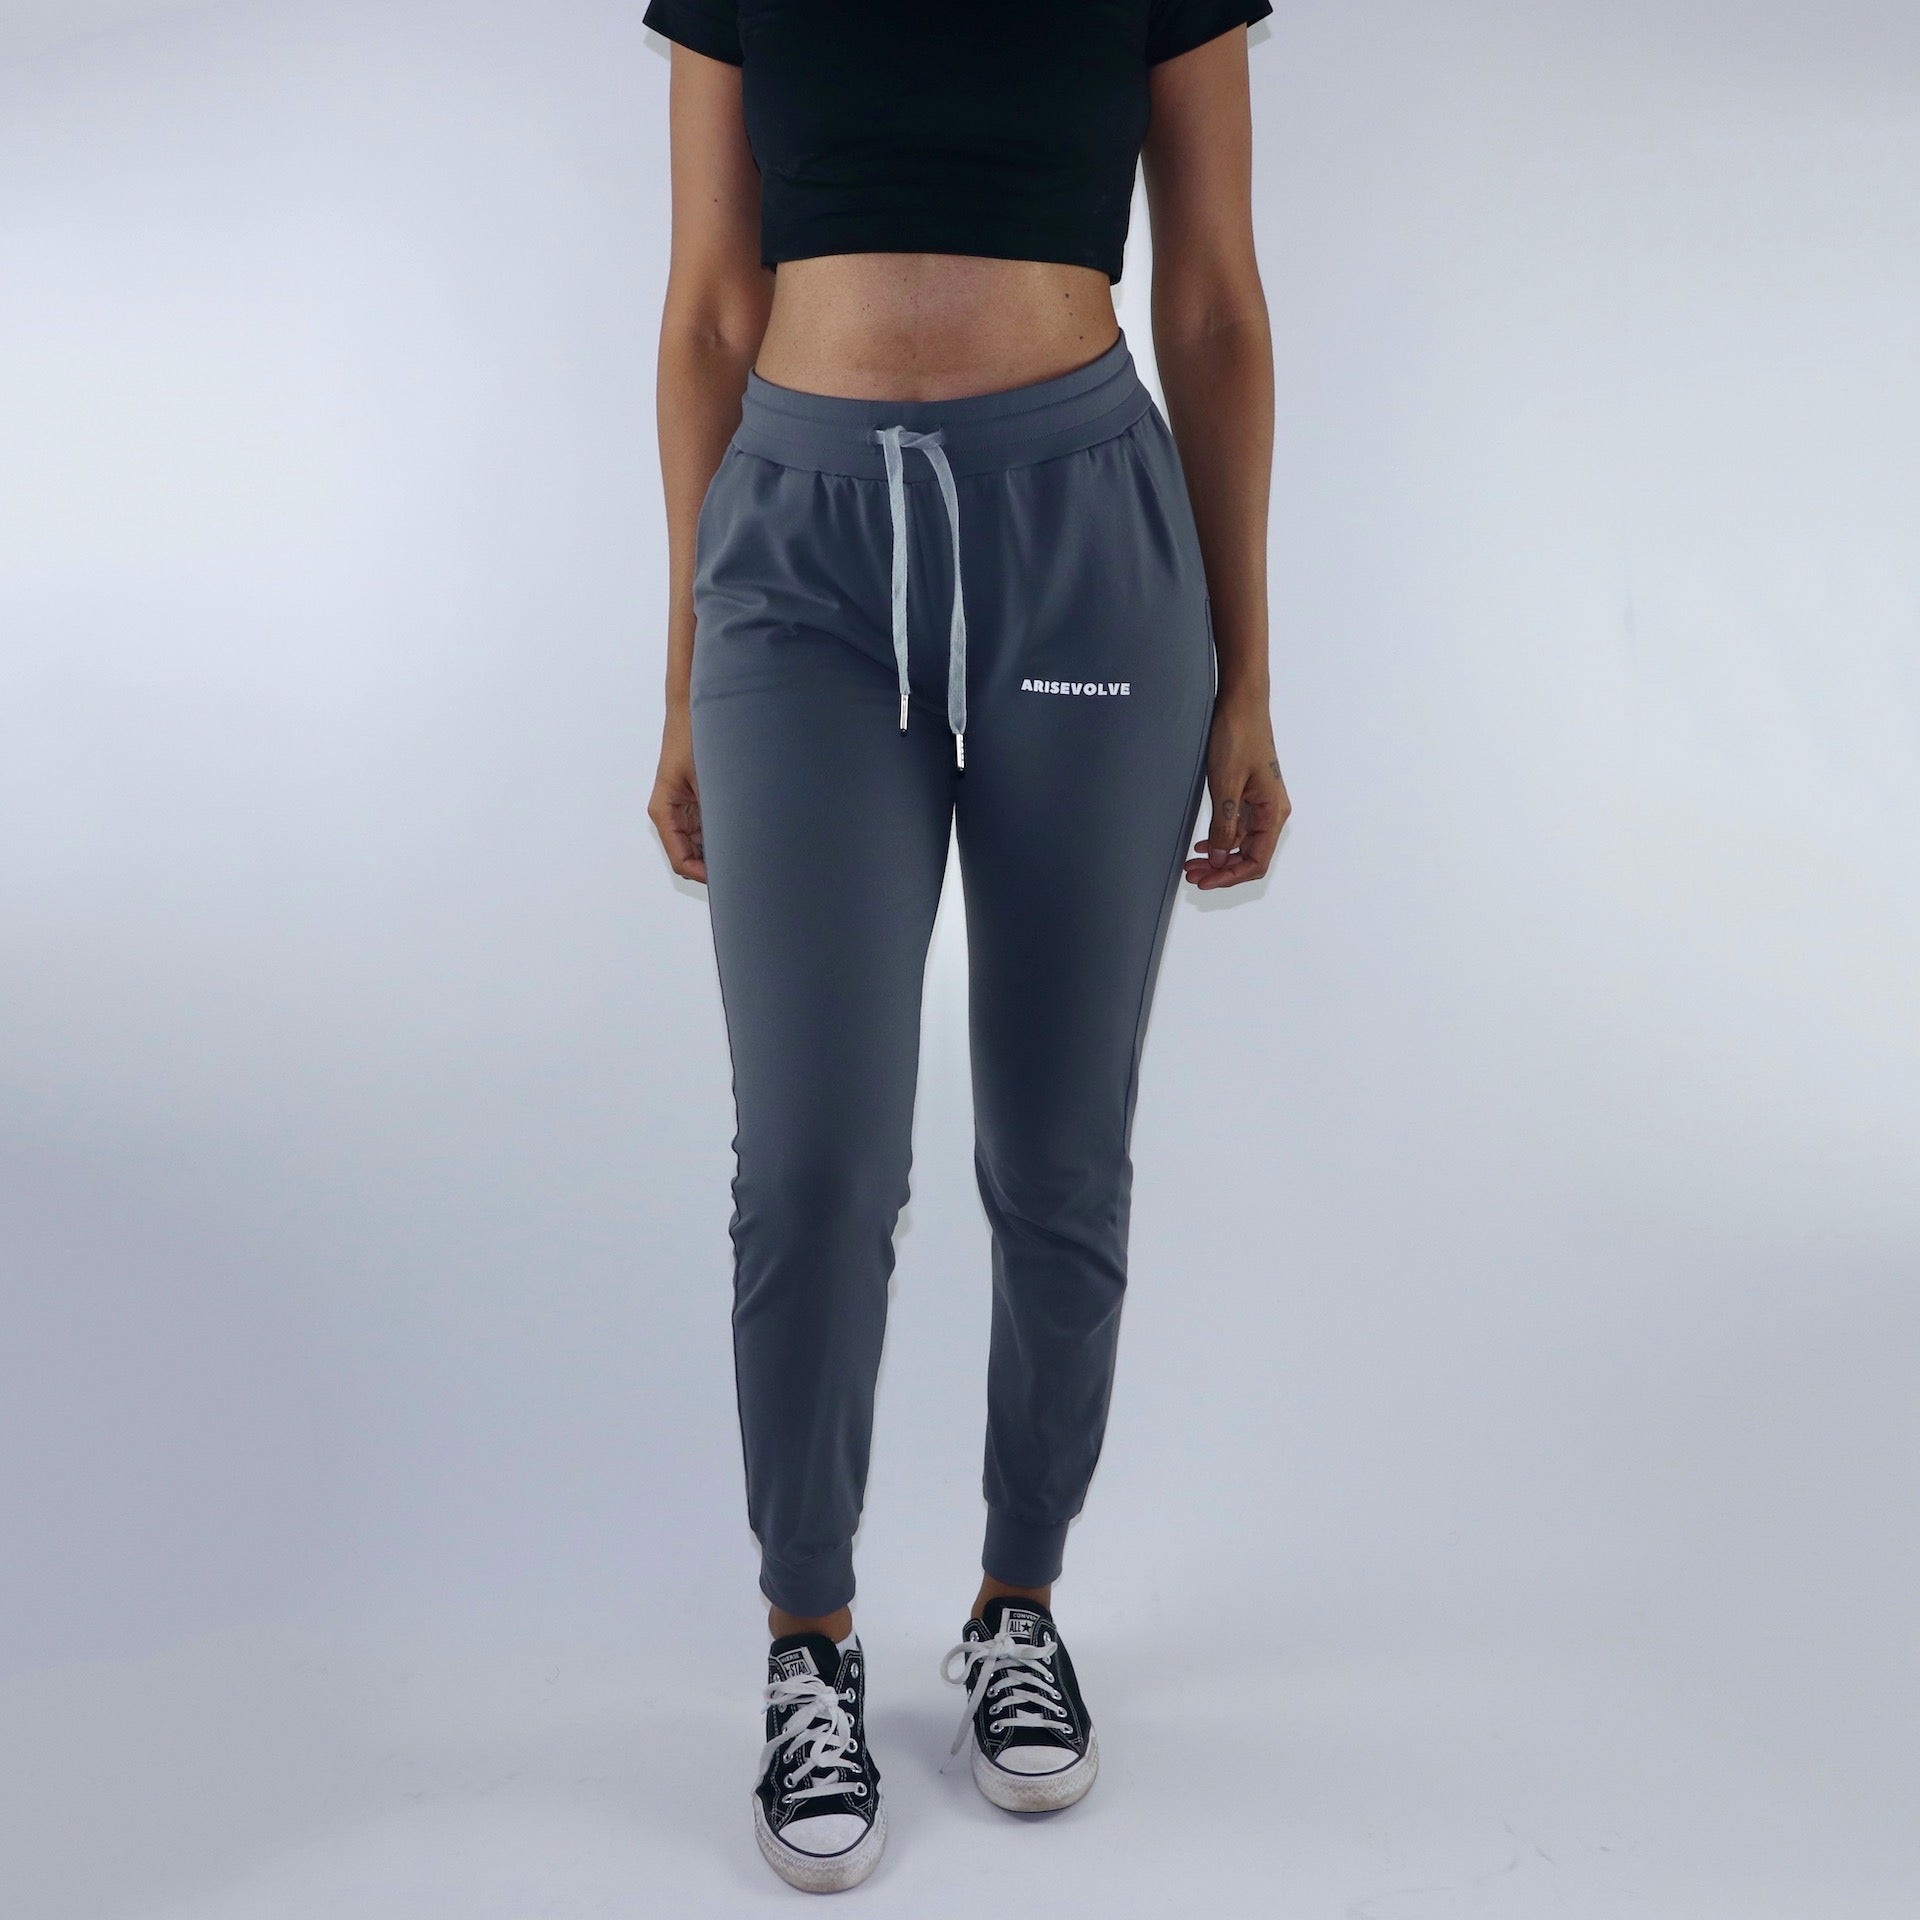 Front view of women's grey activewear joggers with 2 side pockets. Cuffed ankles and mid waist rise.